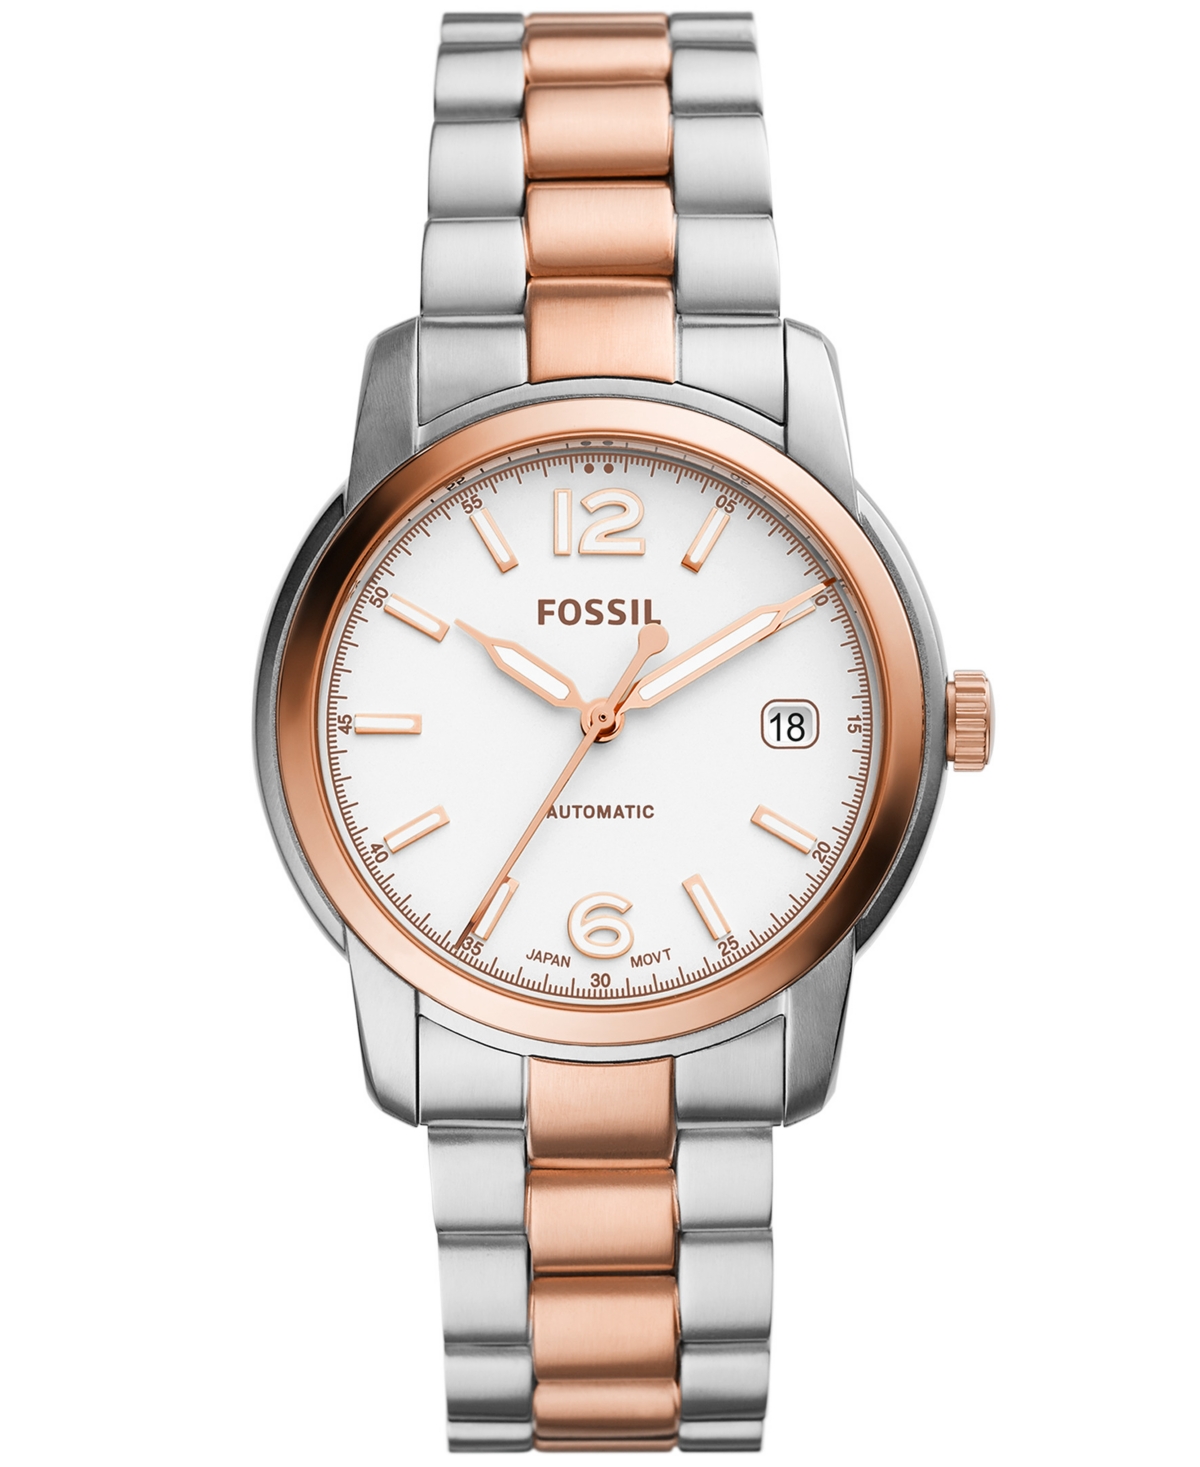 Fossil Women's Heritage Automatic Two Tone Stainless Steel Watch 38mm